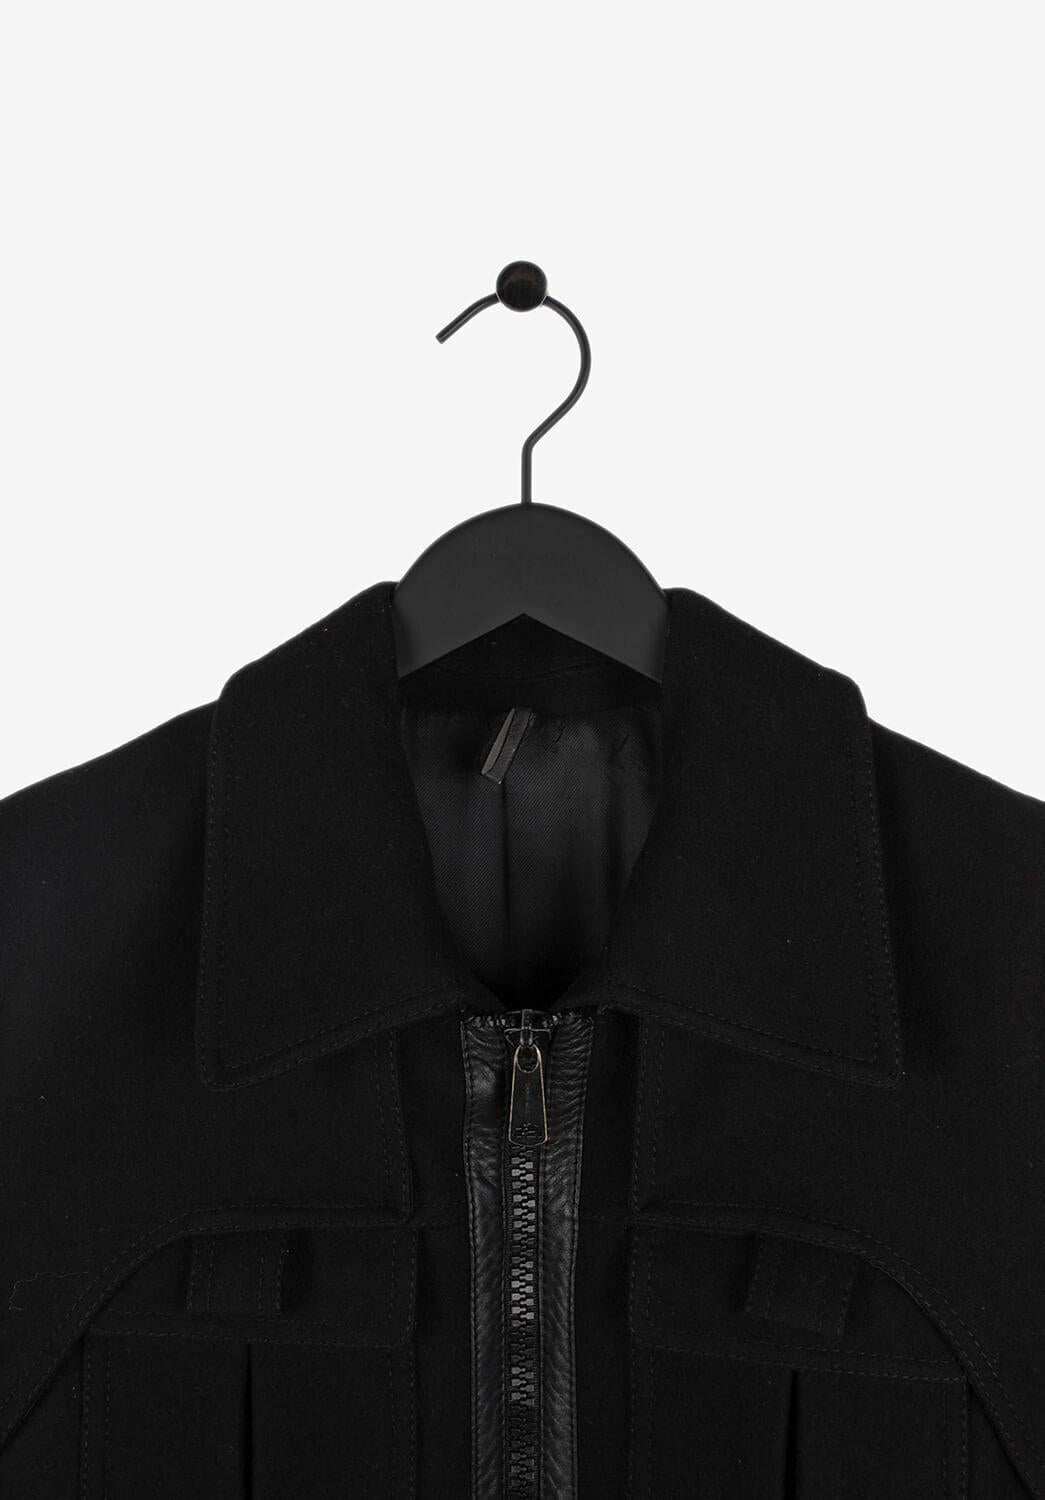 Item for sale is 100% genuine Dior Homme AW06 Hedi Slimane Jacket
Color: Black
(An actual color may a bit vary due to individual computer screen interpretation)
Material: 75% wool, 20% polyamide, 5% cashmere
Tag size: 50IT(M)
This jacket is great